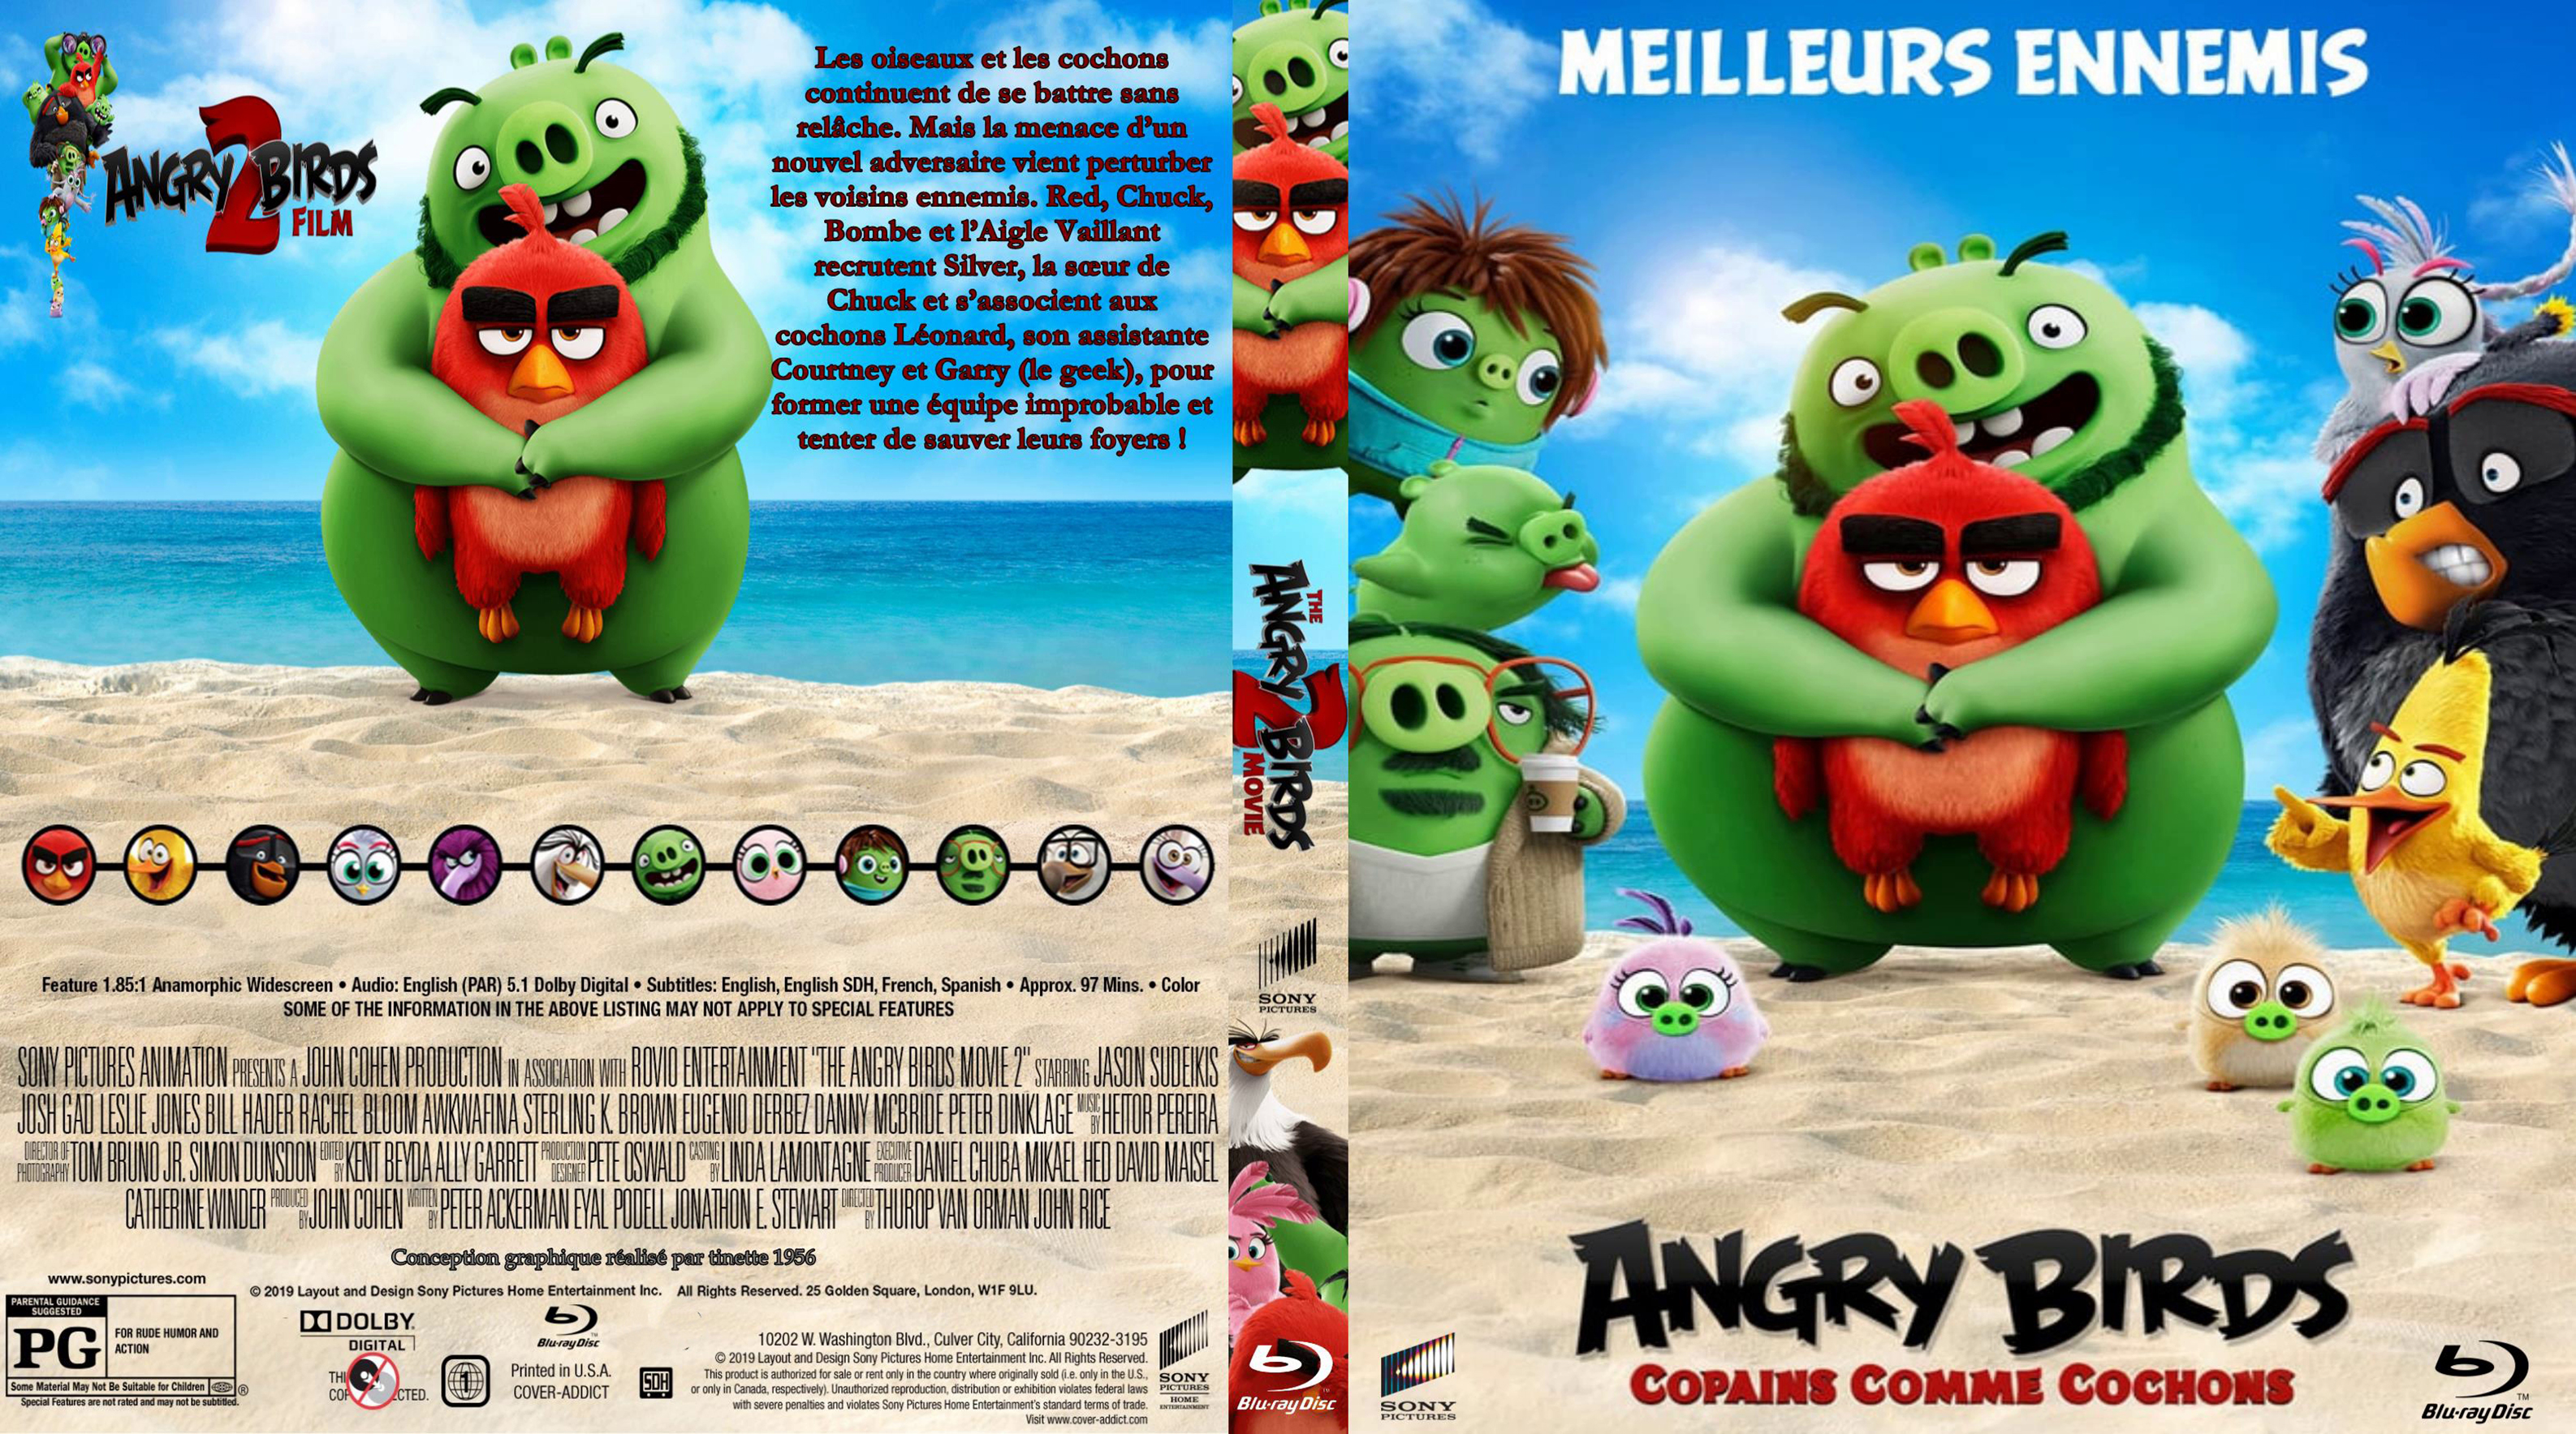 Jaquette DVD Angry Birds : Copains comme cochons custom